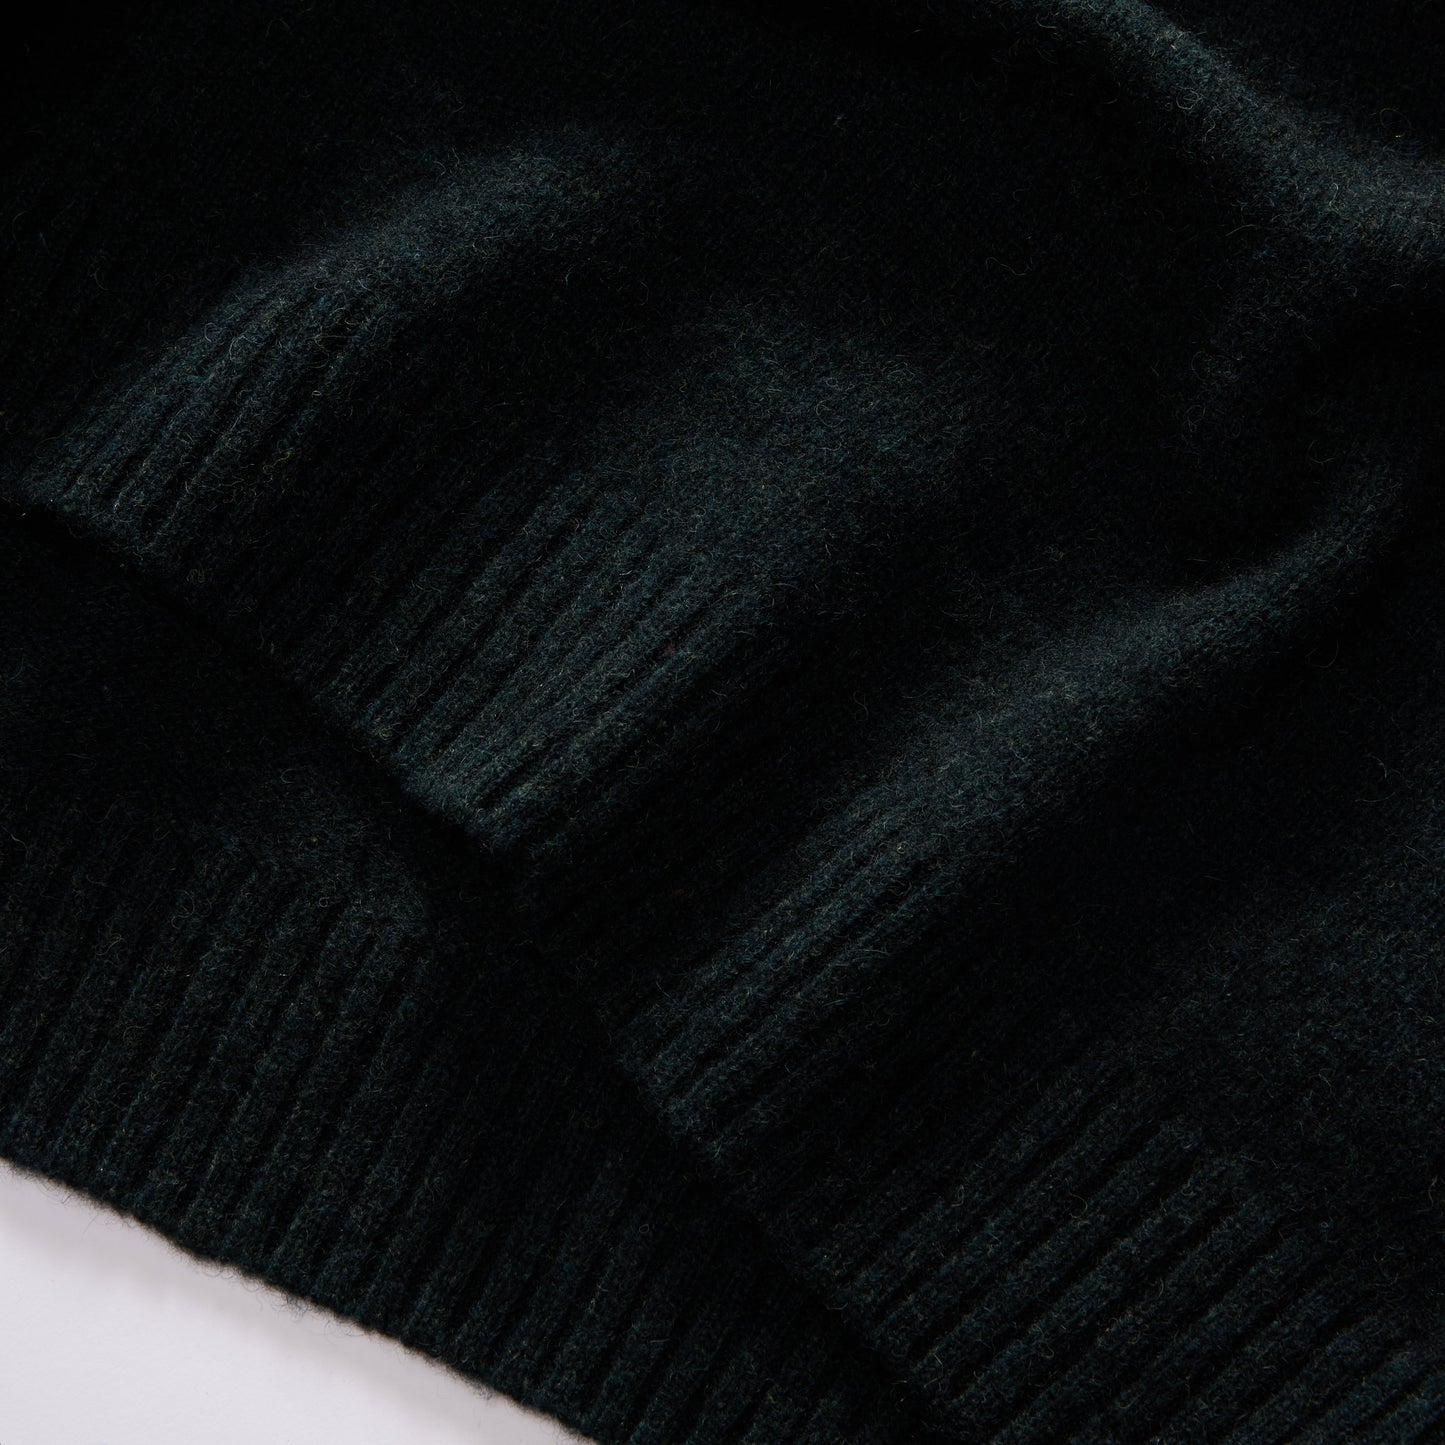 Taylor Stitch - The Lodge Sweater in Black Pine